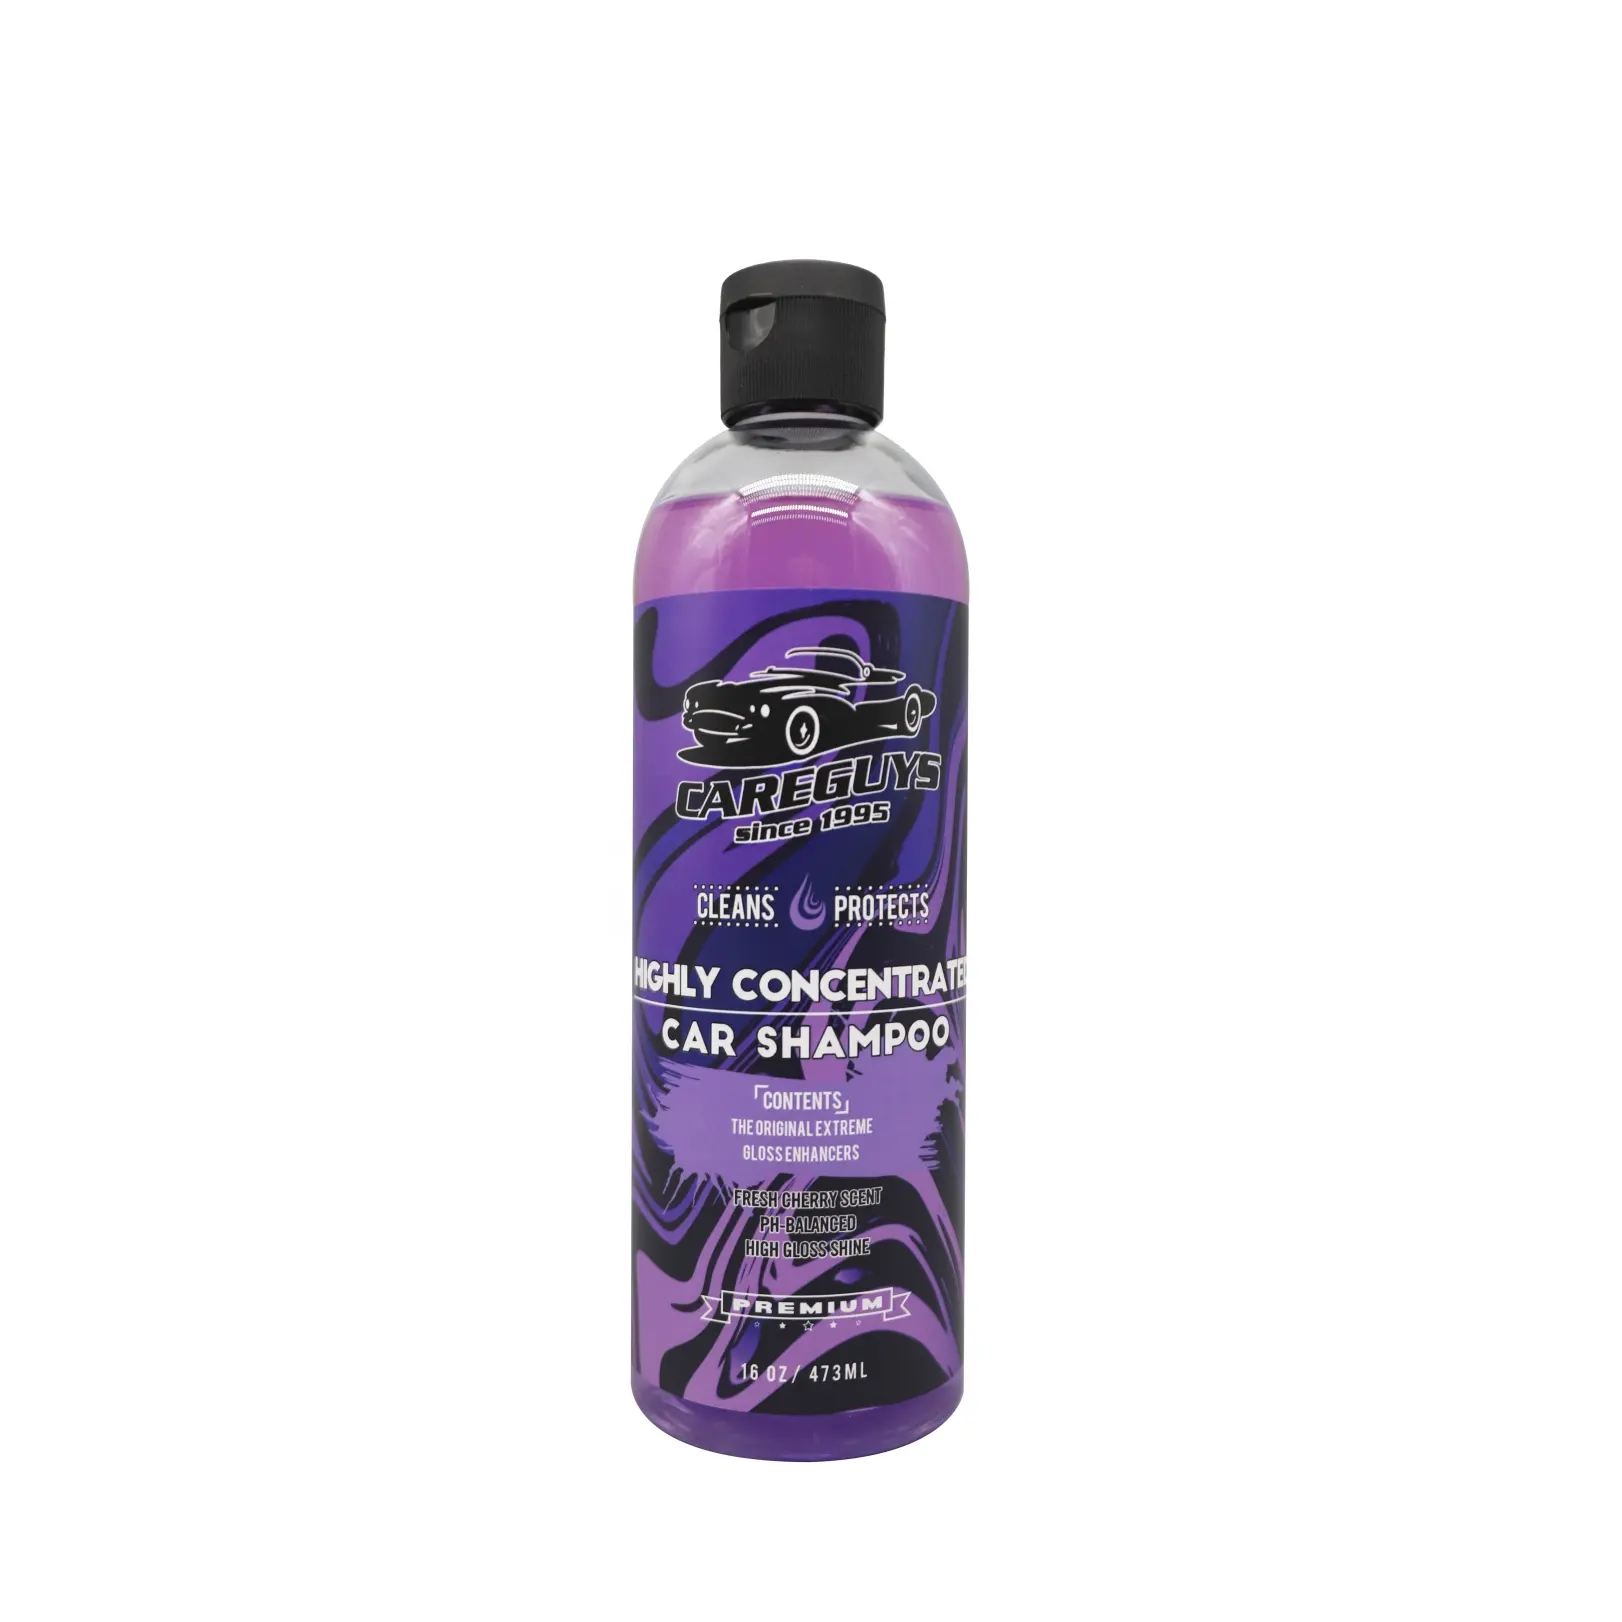 High concentrate car wash shampoo,High-quality exterior formula applies thick, luscious foam and is perfect on your car